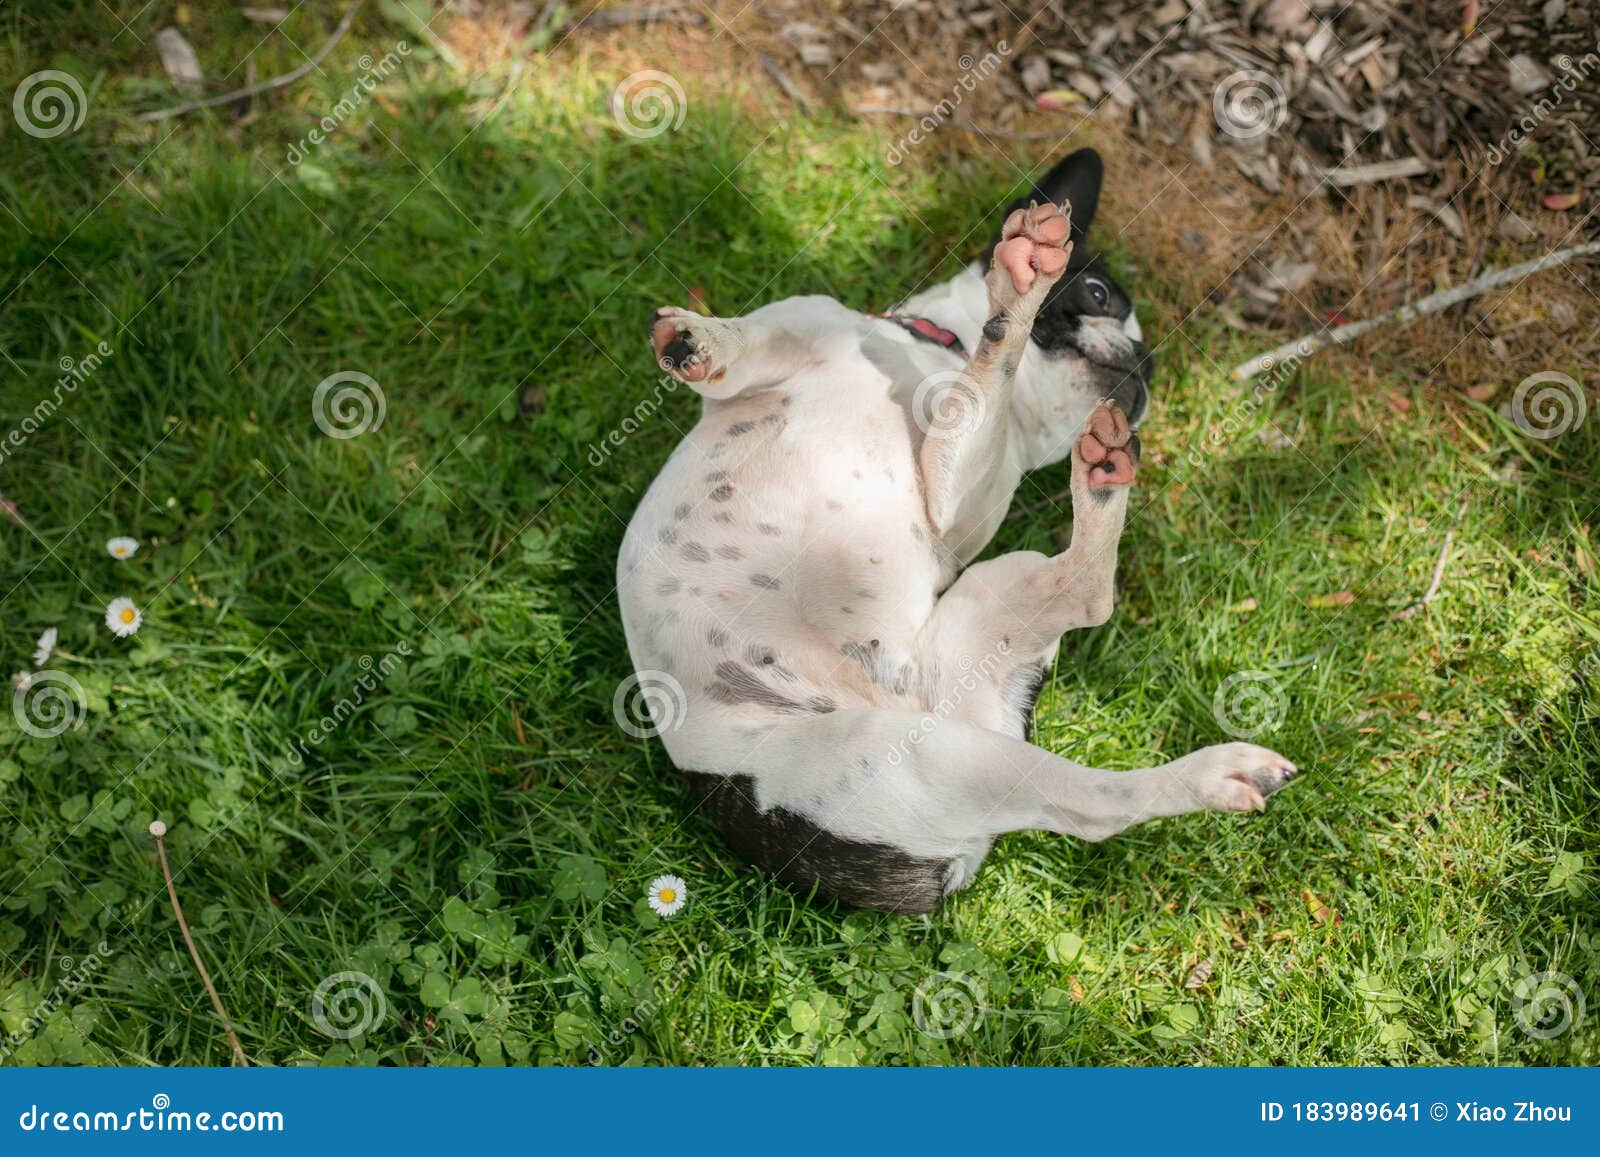 Cute Frenchbull and Boston Terrier Mix Dog Stock Image - Image of ...